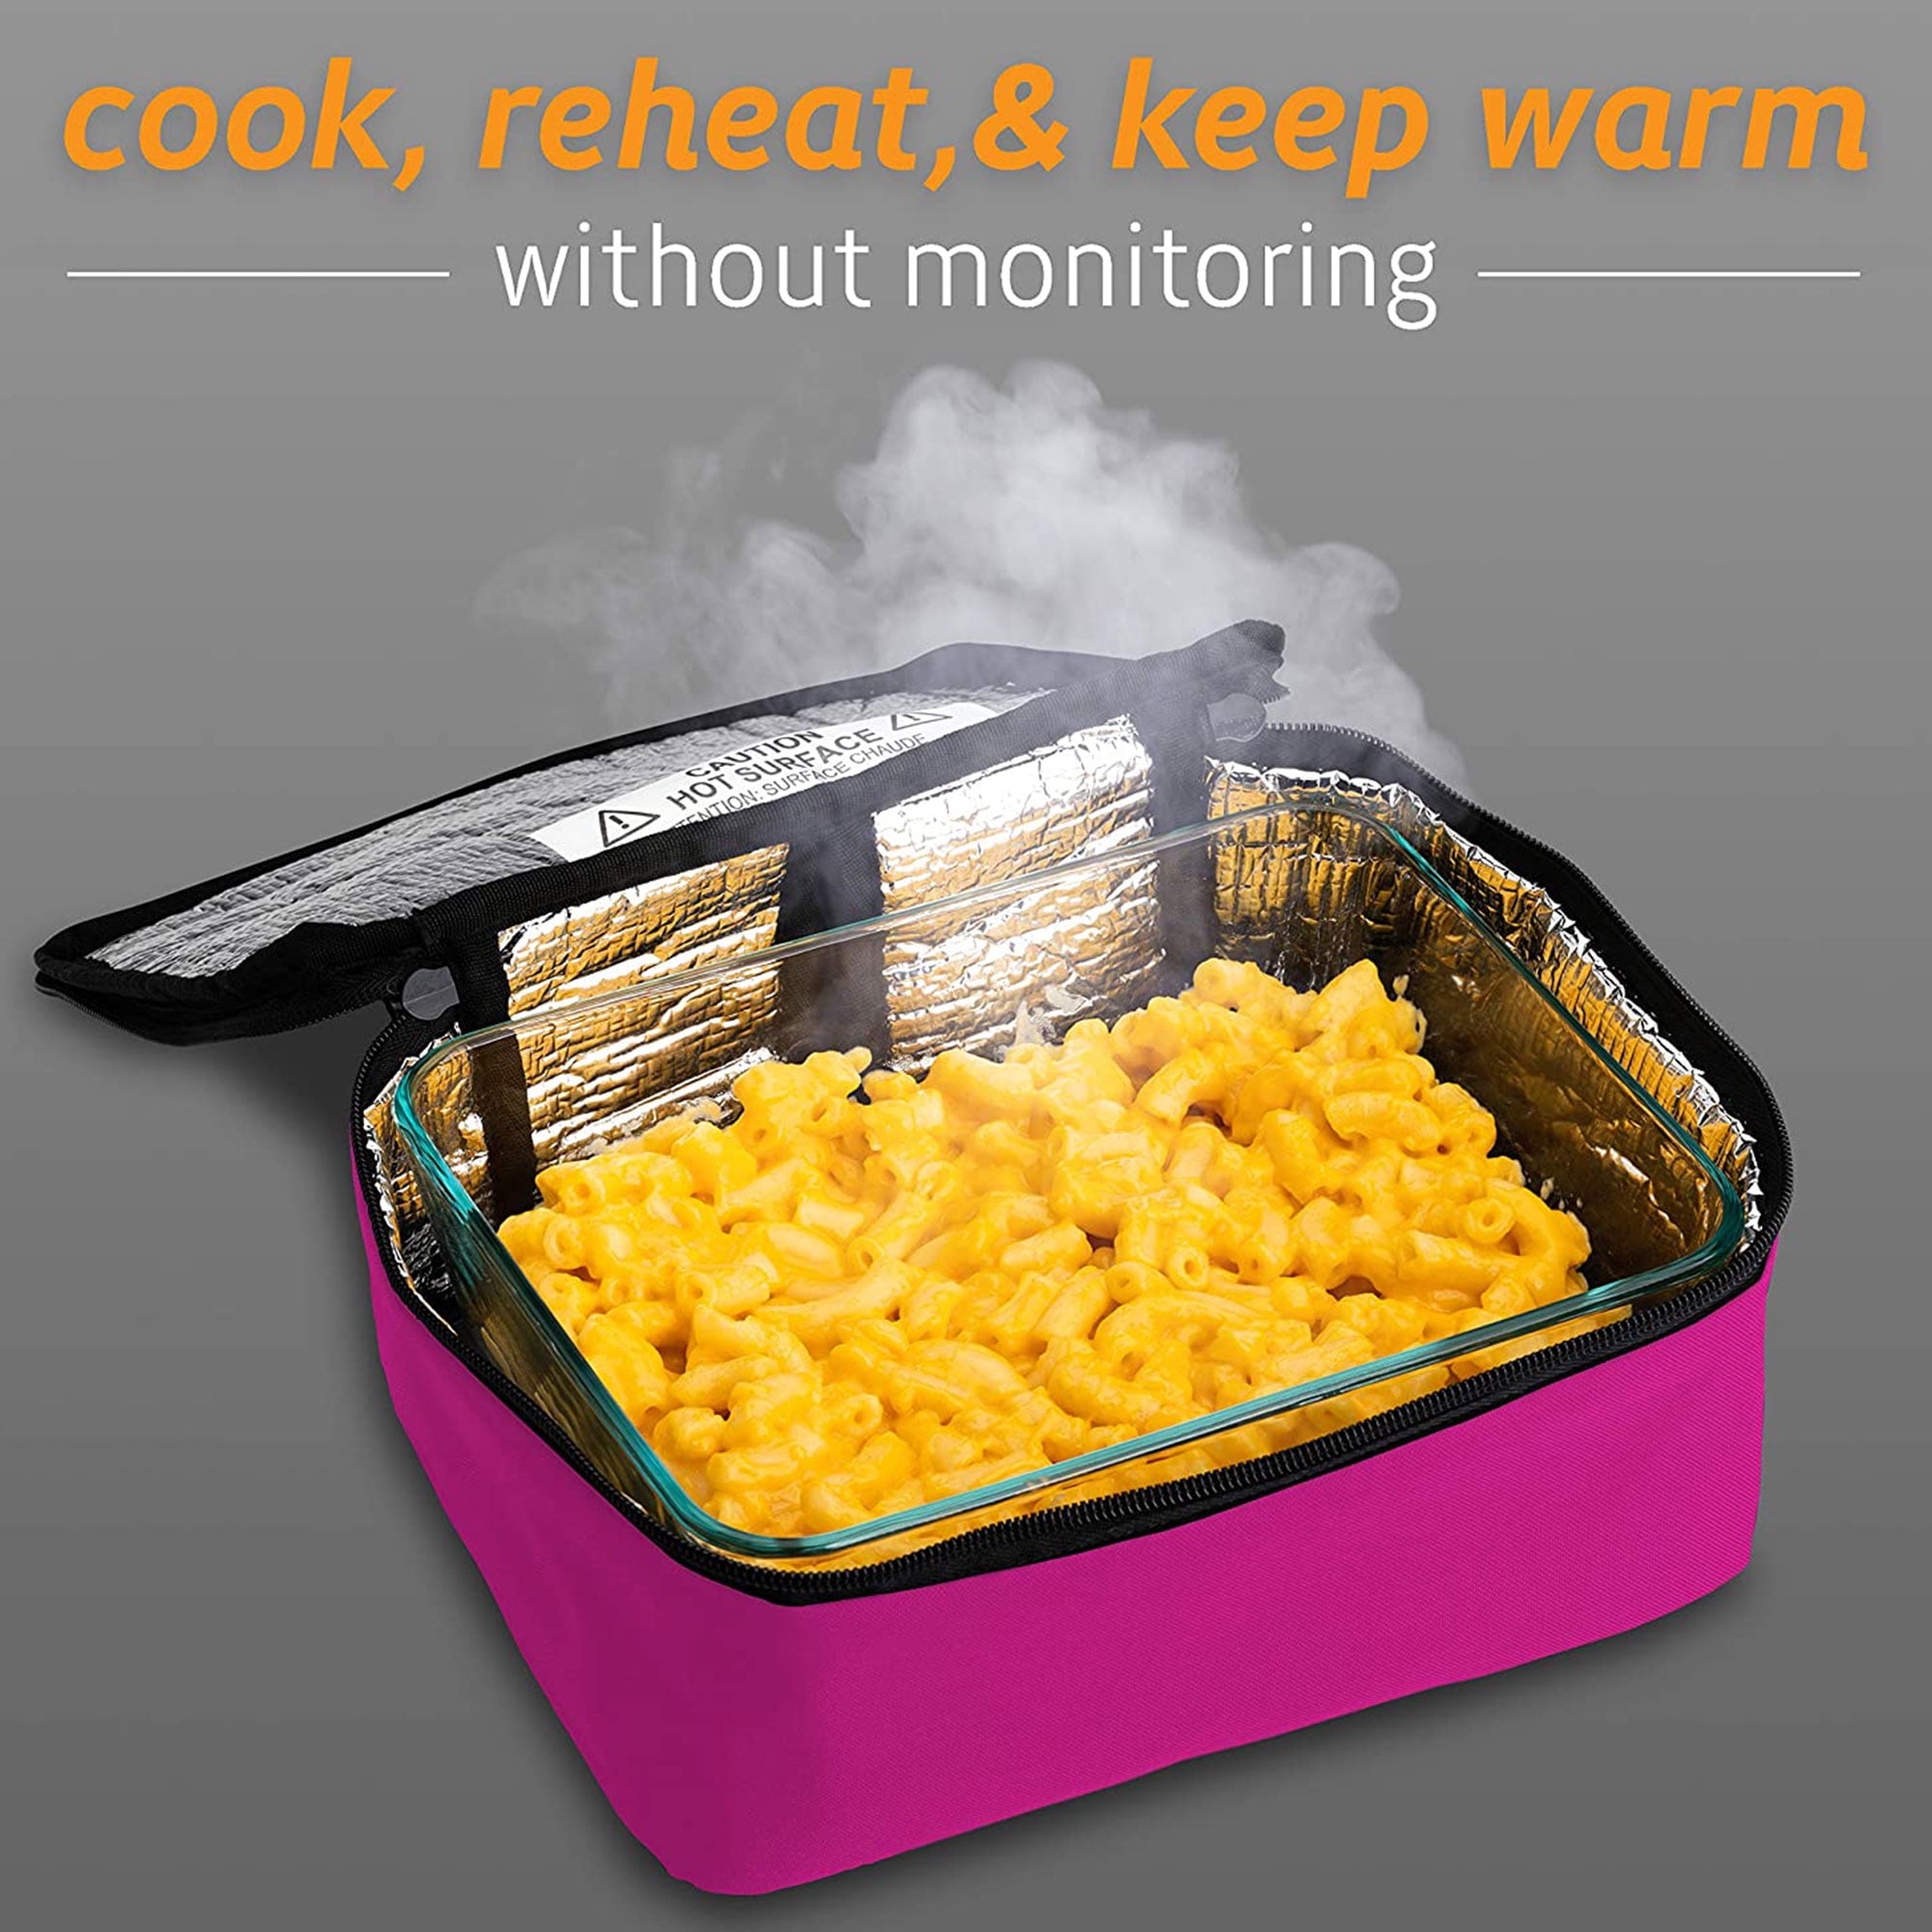 Portable food warmer for warm food on the go - CNET